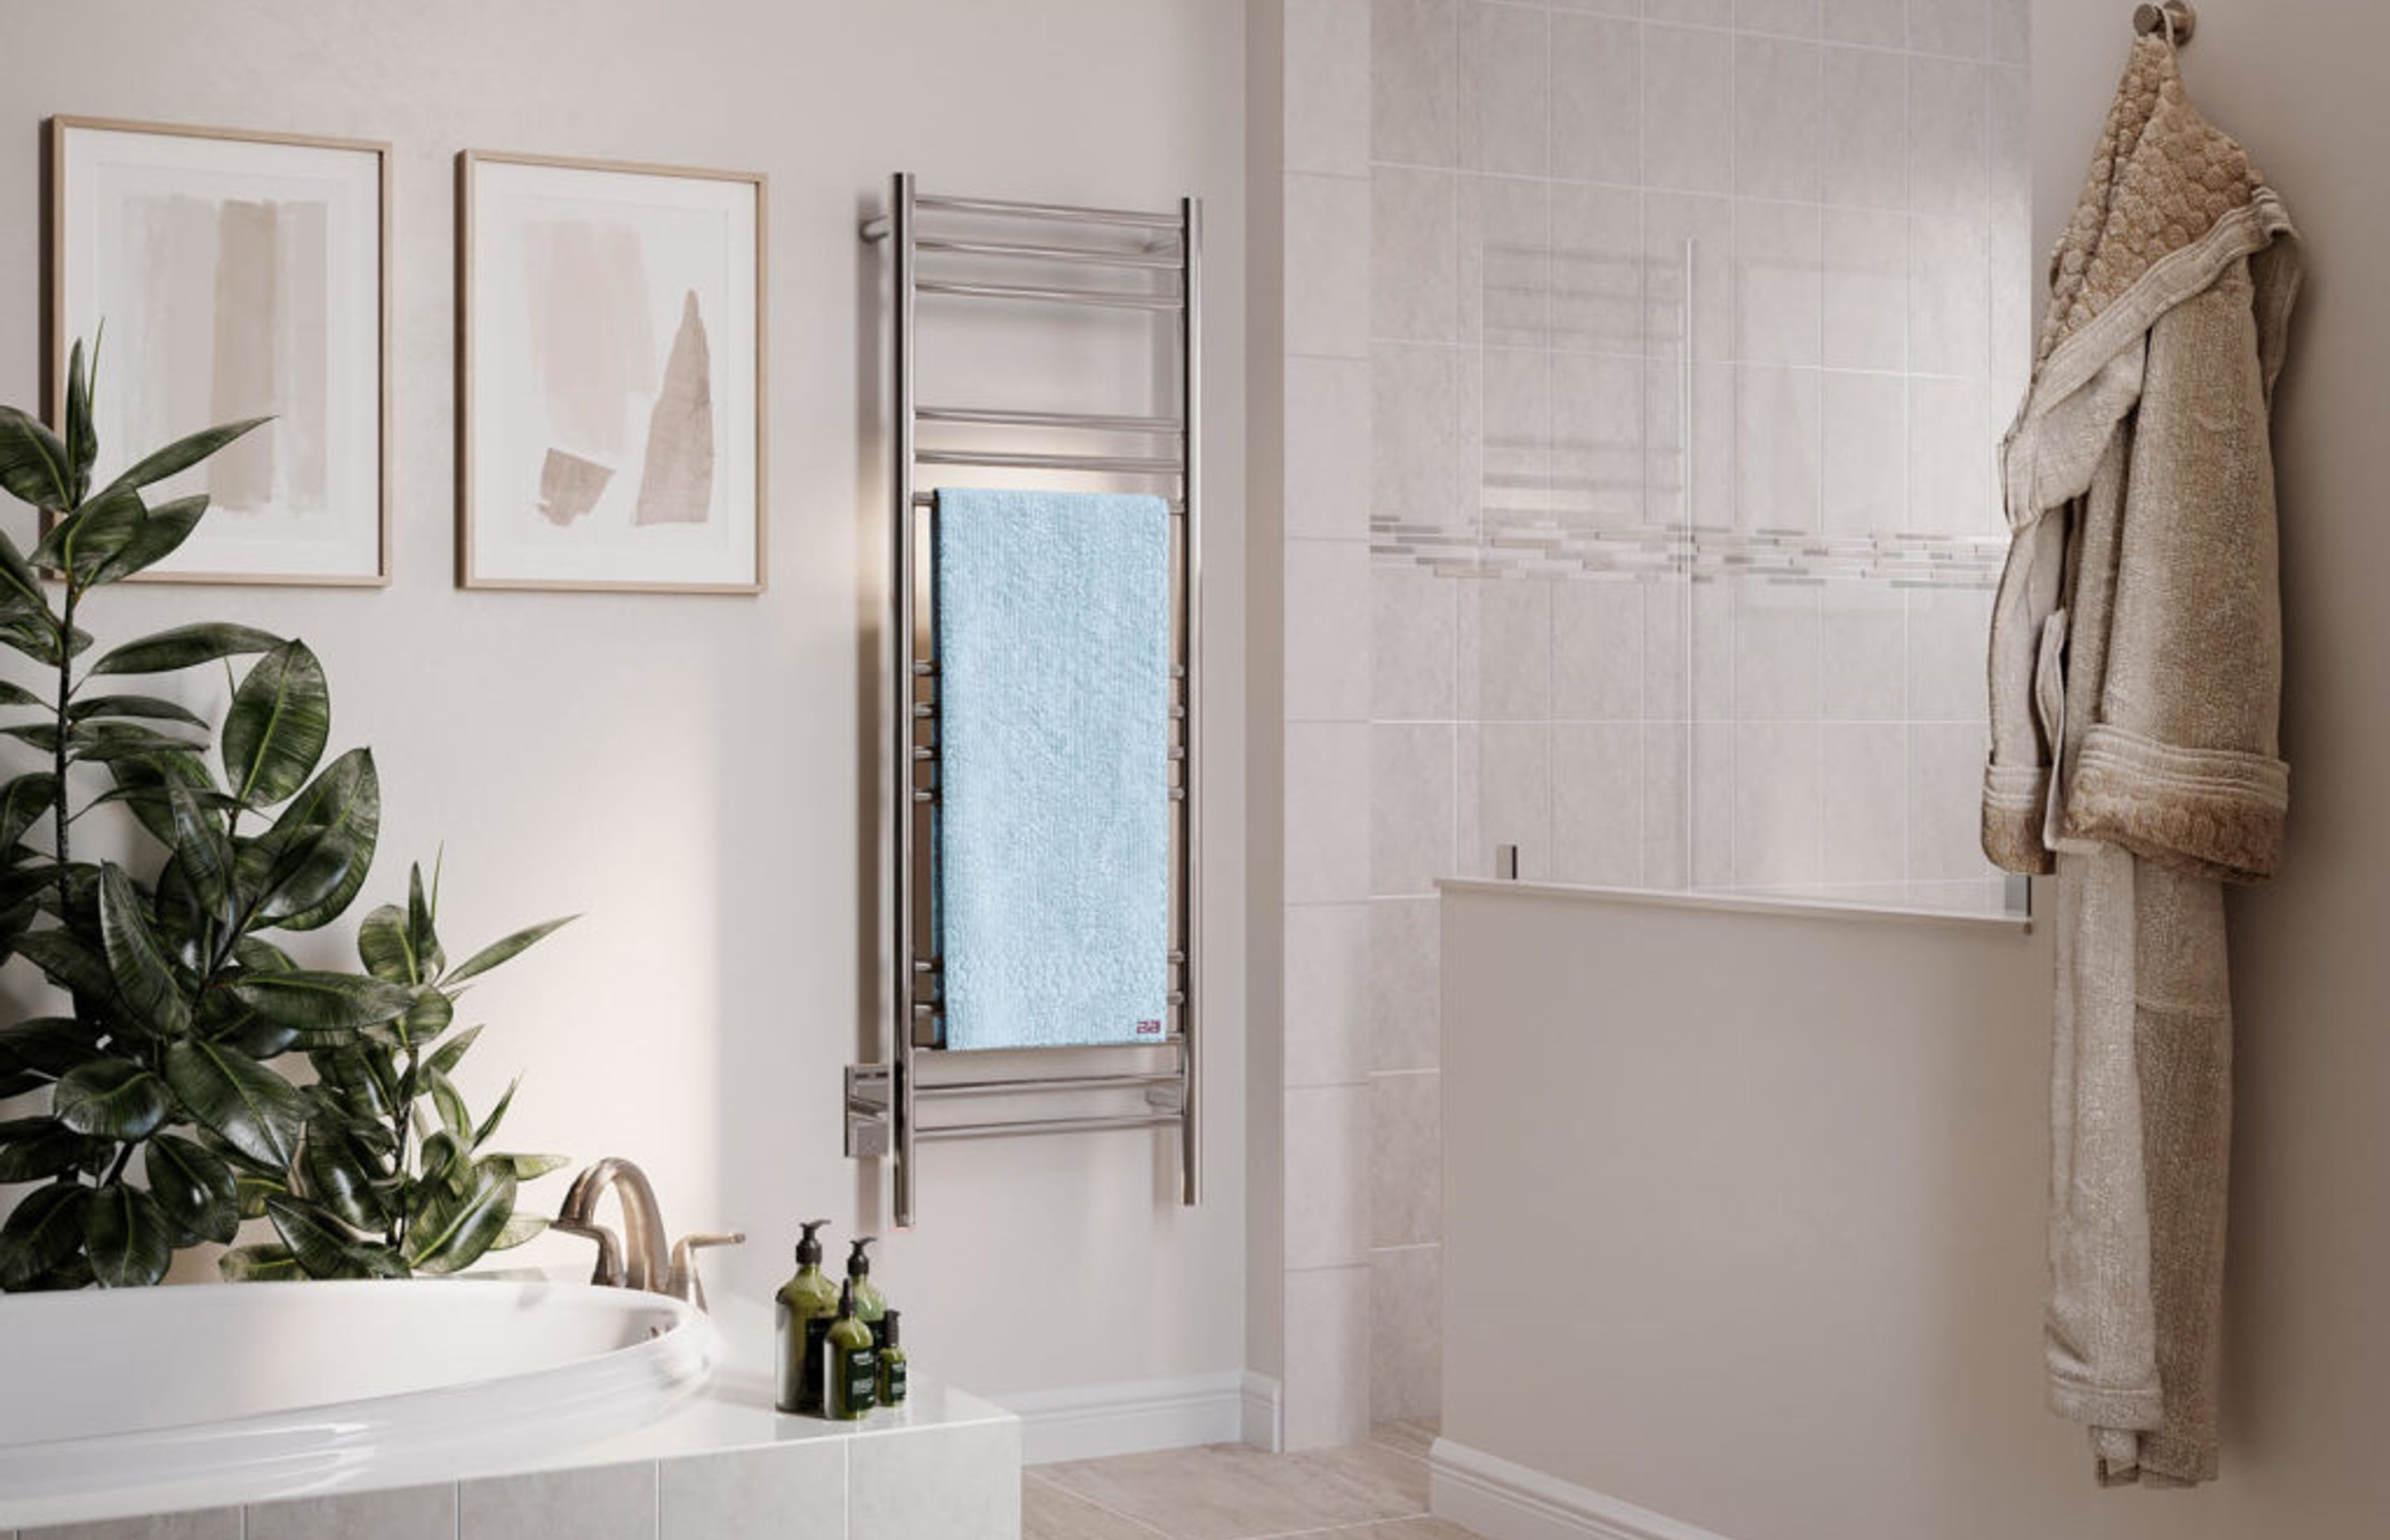 NATURAL 12 Bar 500mm heated towel rail with PTSelect Switch (US model shown here - square cover plate)